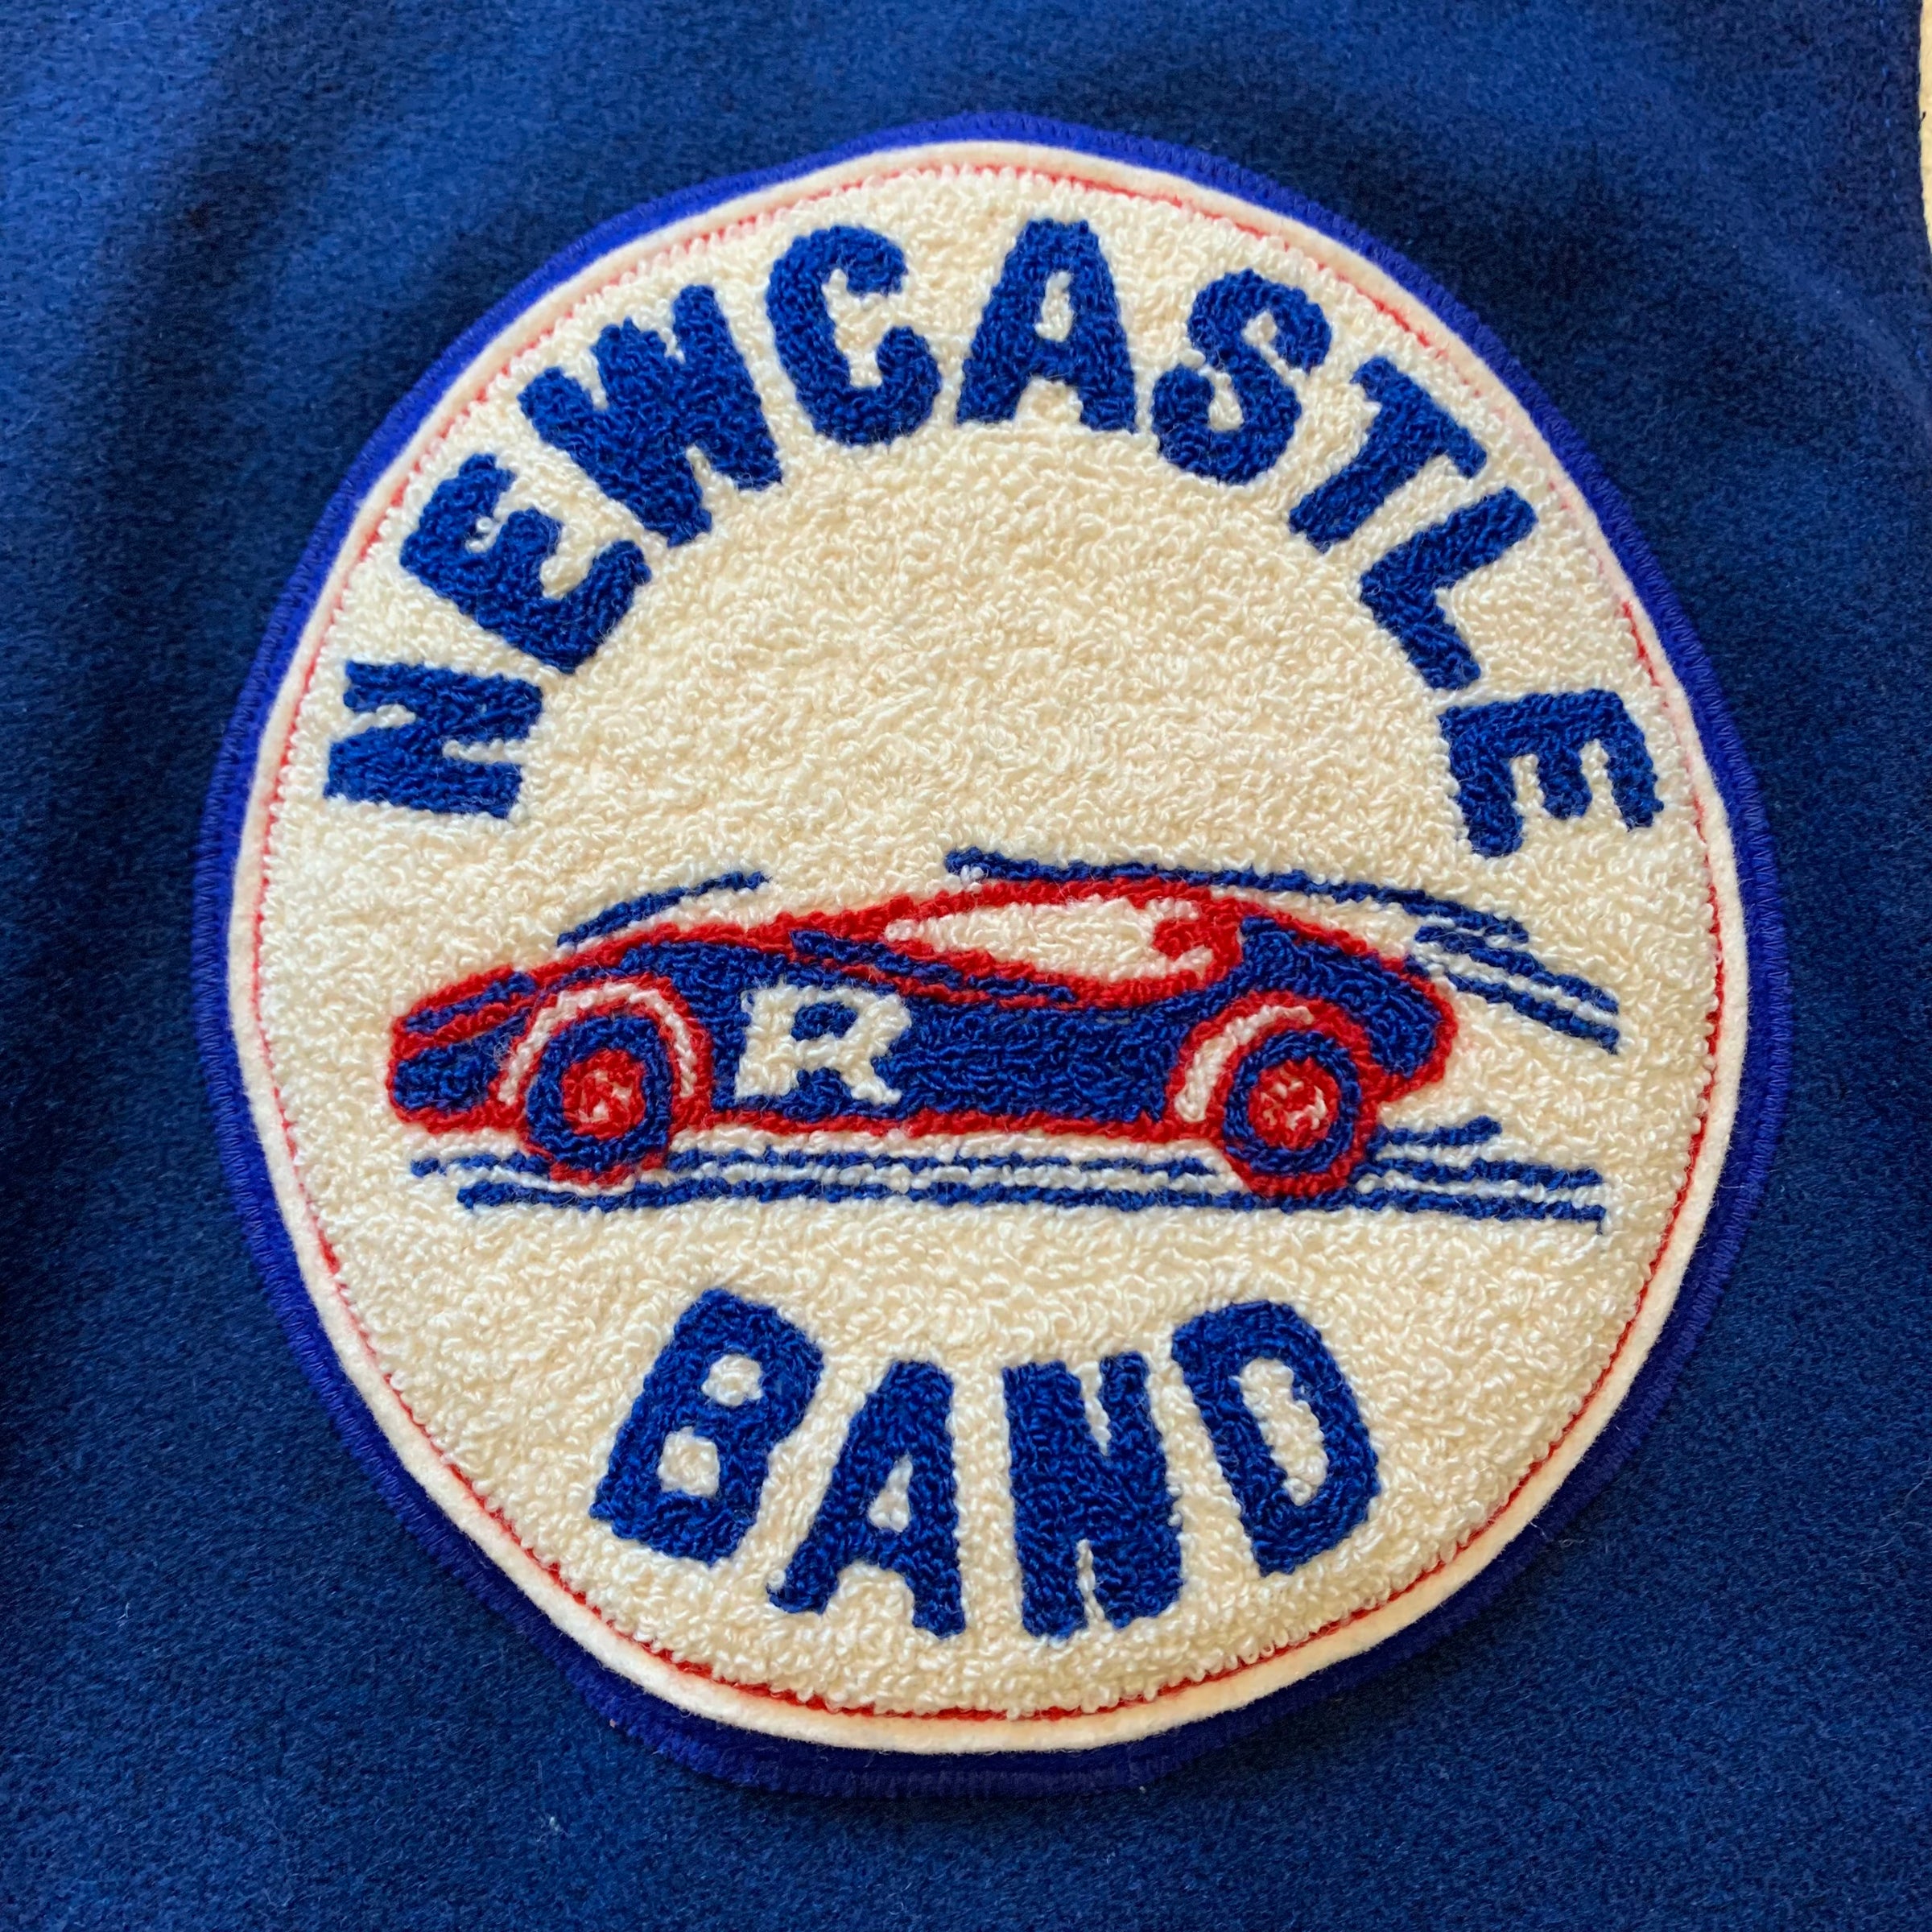 1970's Newcastle Band Patched Varsity Wool Jacket with Leather Accents Small